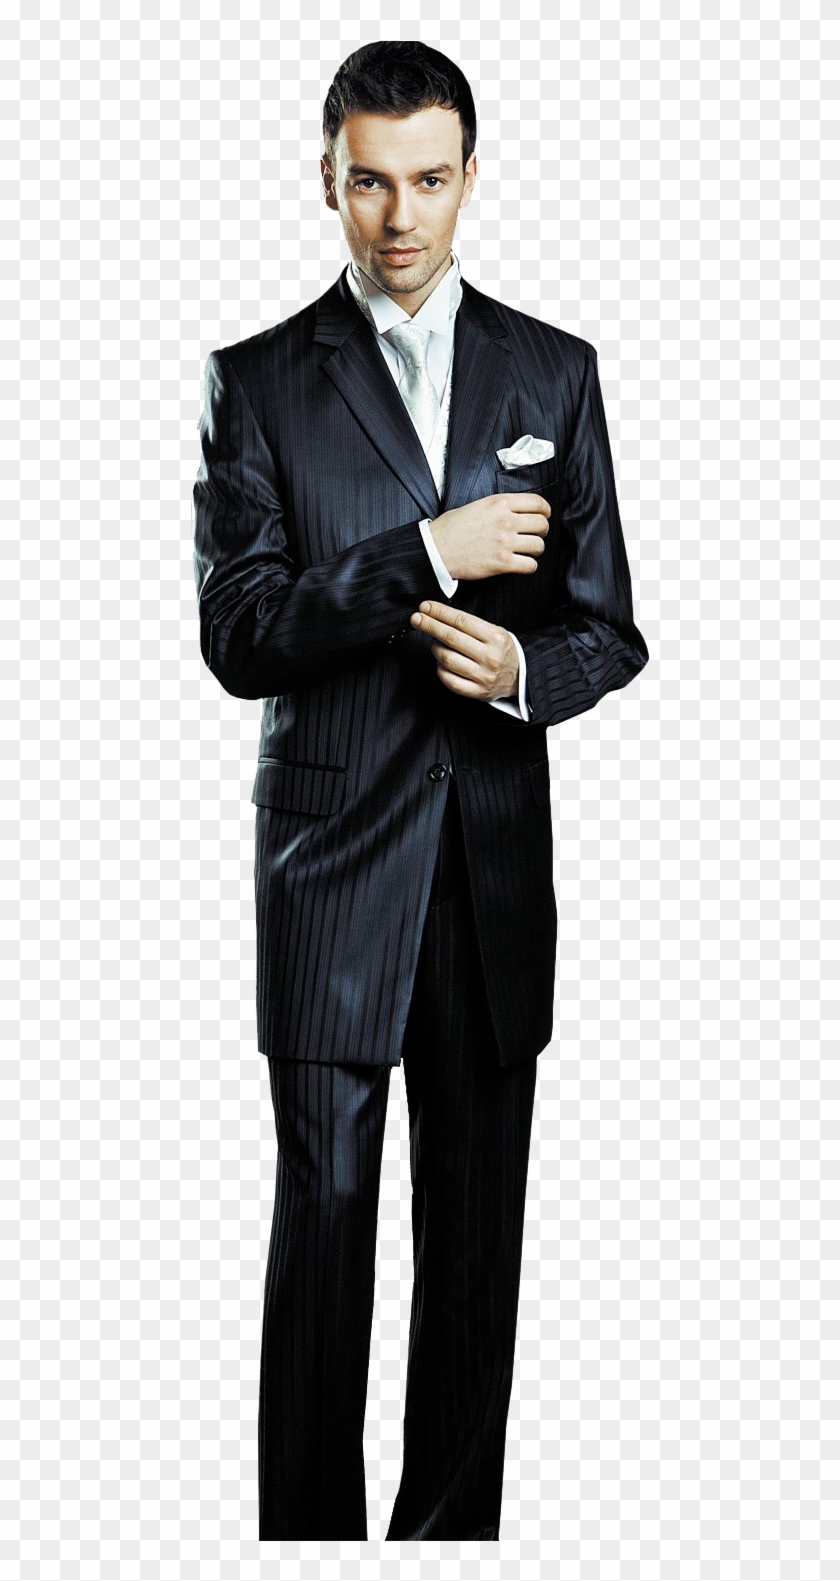 Businessman In Suit Png Hd Quality - Businessman Png Clipart